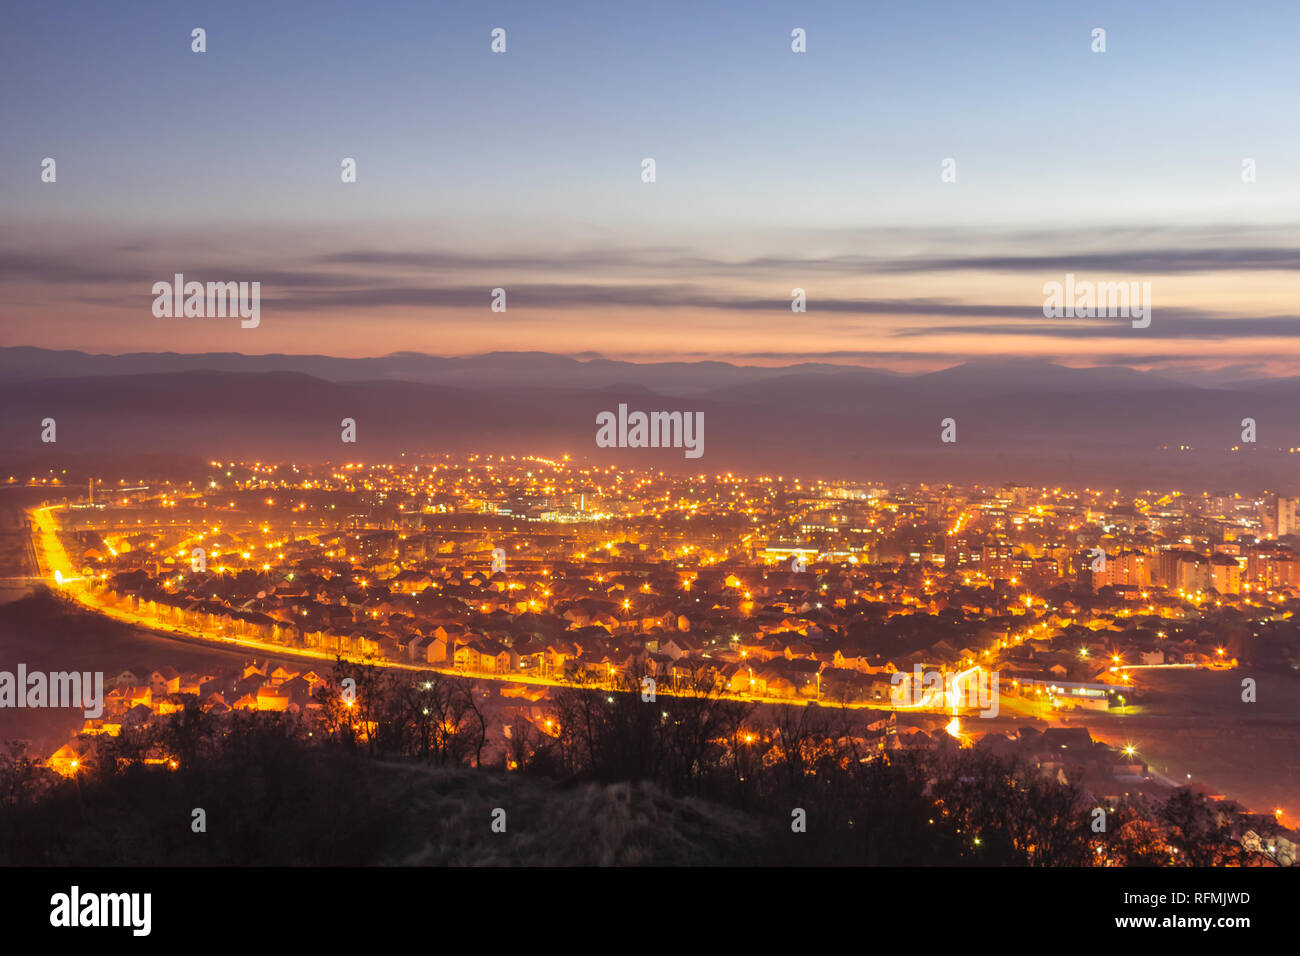 Stunning late blue hour view of Pirot cityscape with hot city lights and colorful sky Stock Photo